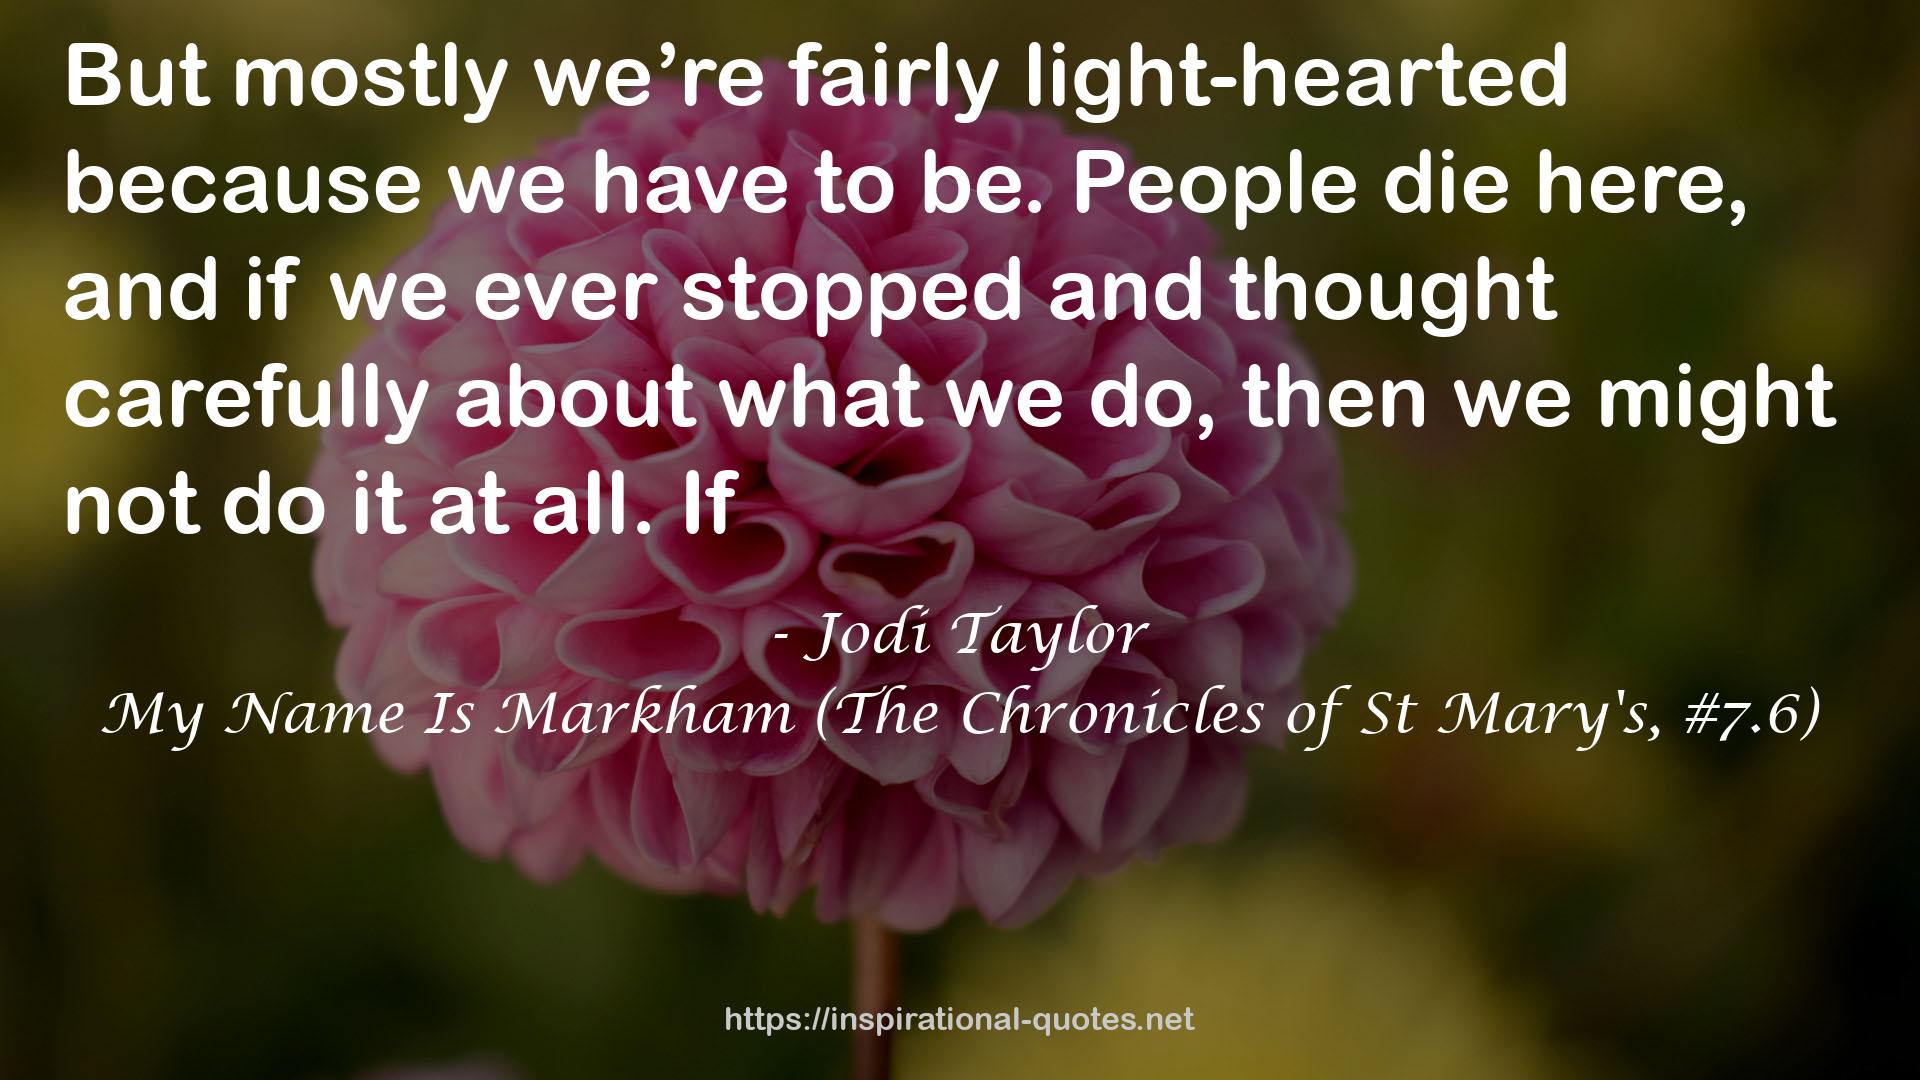 My Name Is Markham (The Chronicles of St Mary's, #7.6) QUOTES